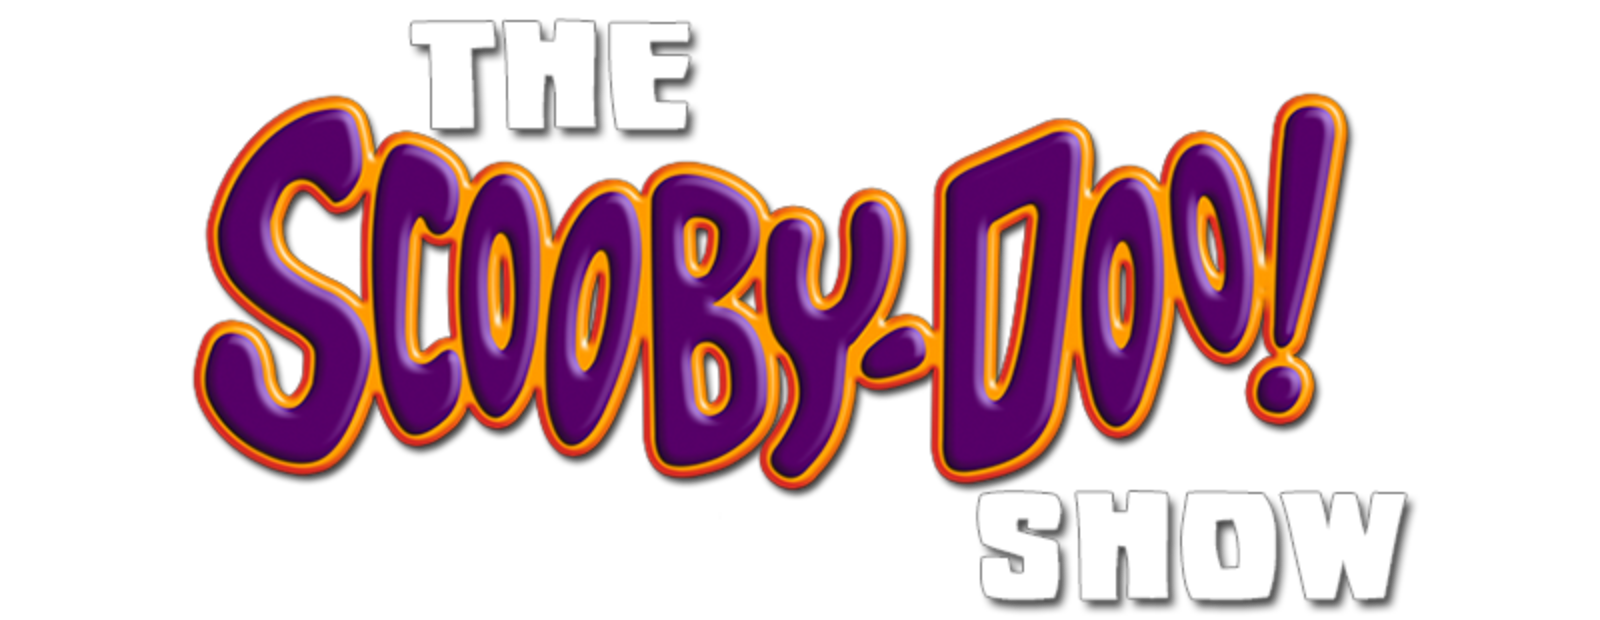 The Scooby-Doo Show (4 DVDs Box Set)